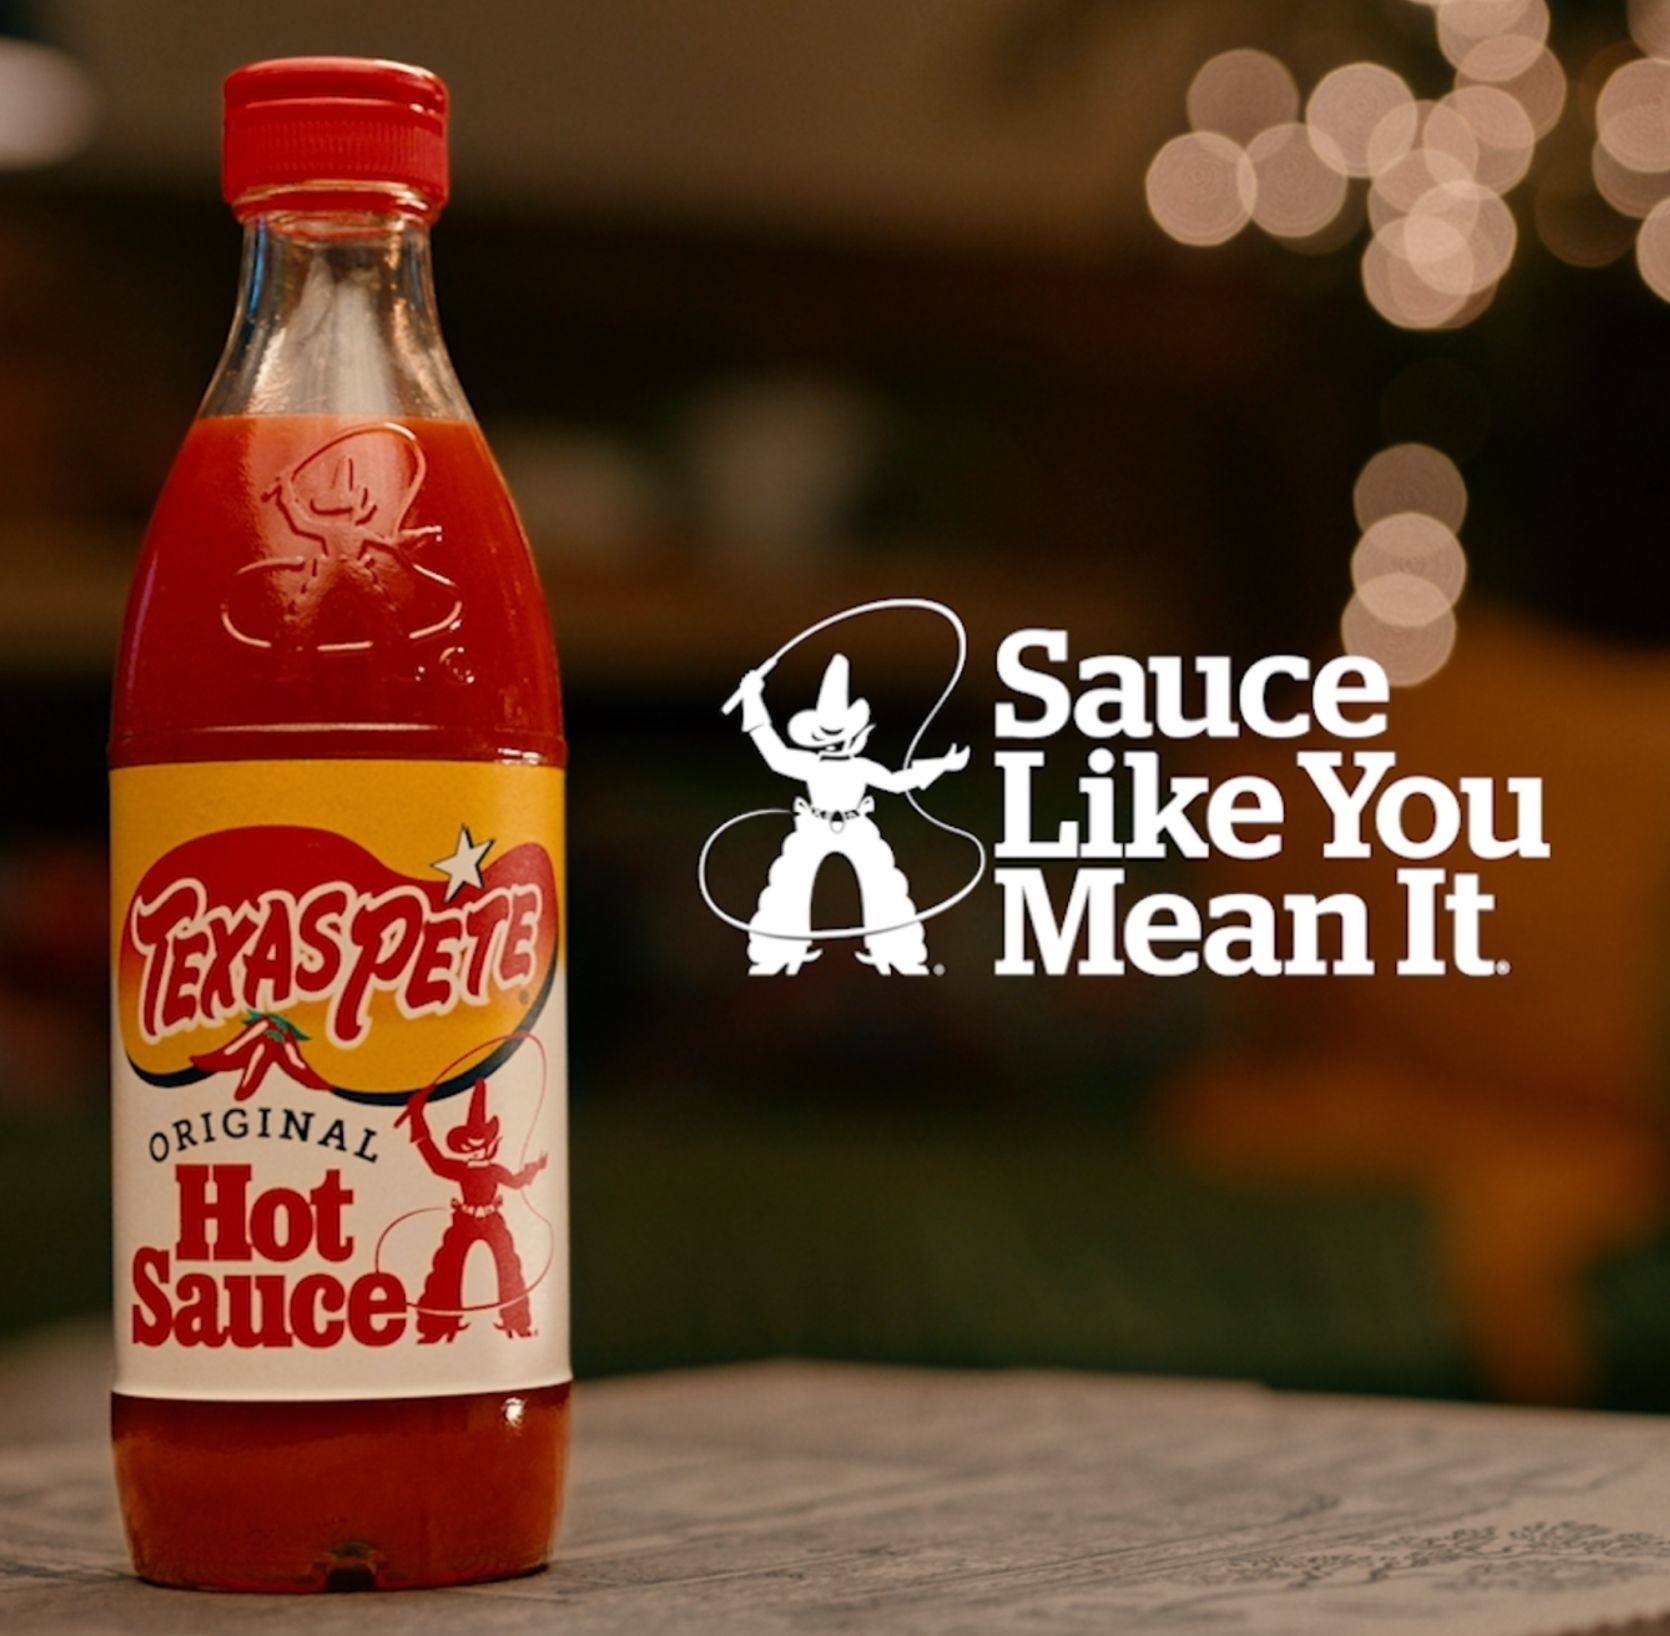 Texas Pete® Original Hot Sauce is an iconic flavor booster for restaurant tables.